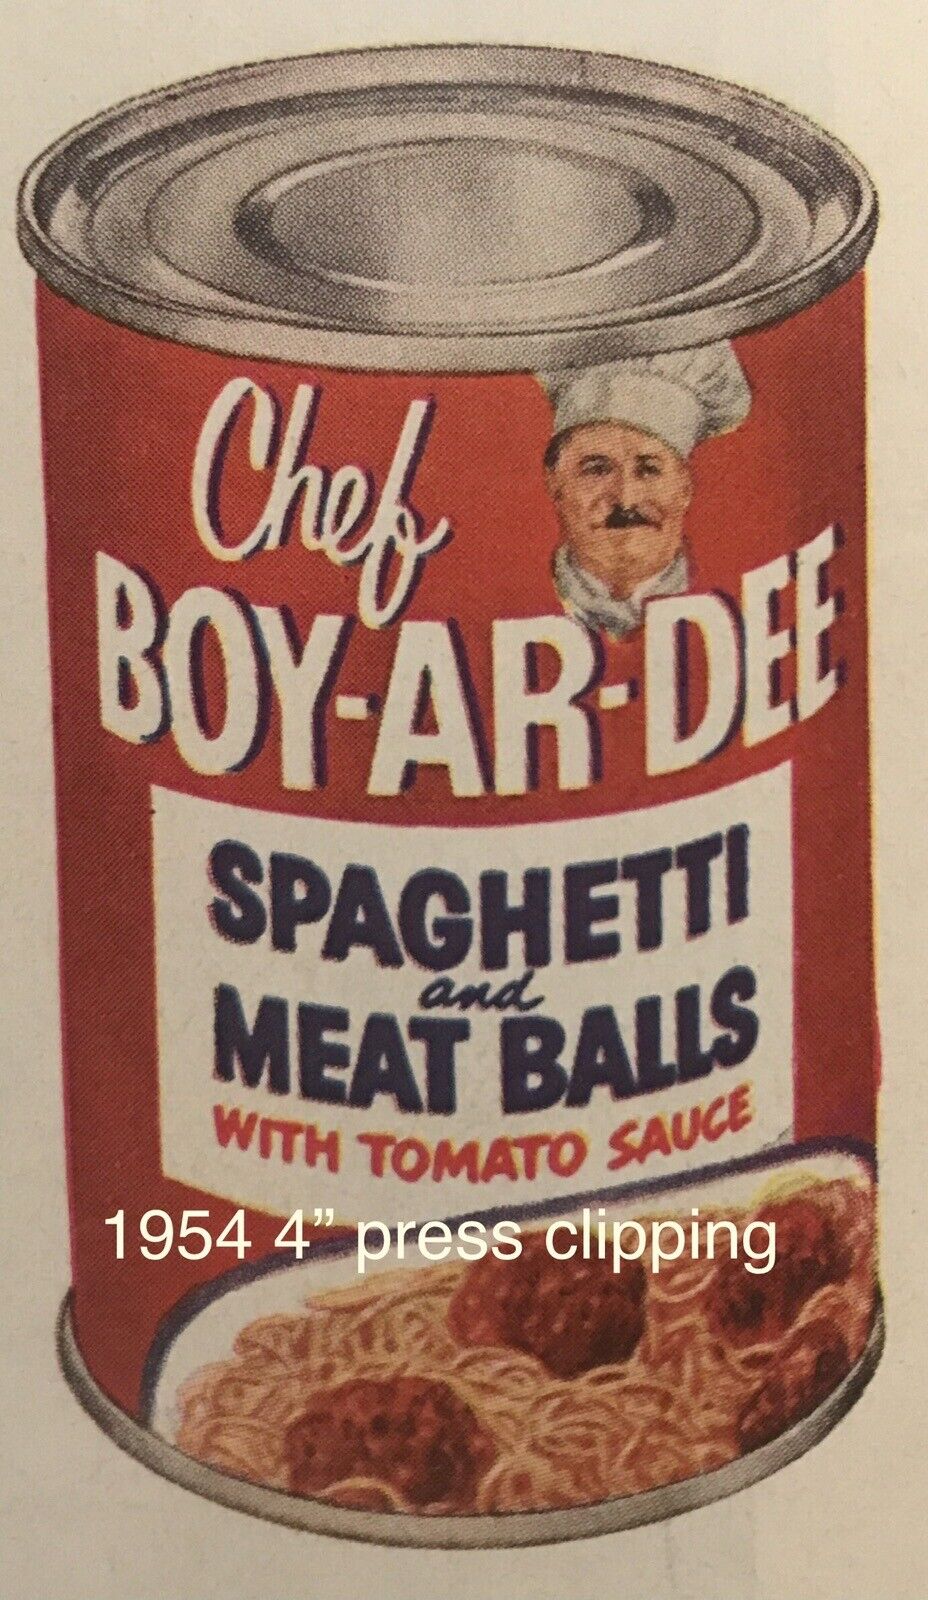 1954 Chef Boy-ar-dee Spaghetti & Meatballs PRESS CLIPPING Can IMAGE 4” Vintage